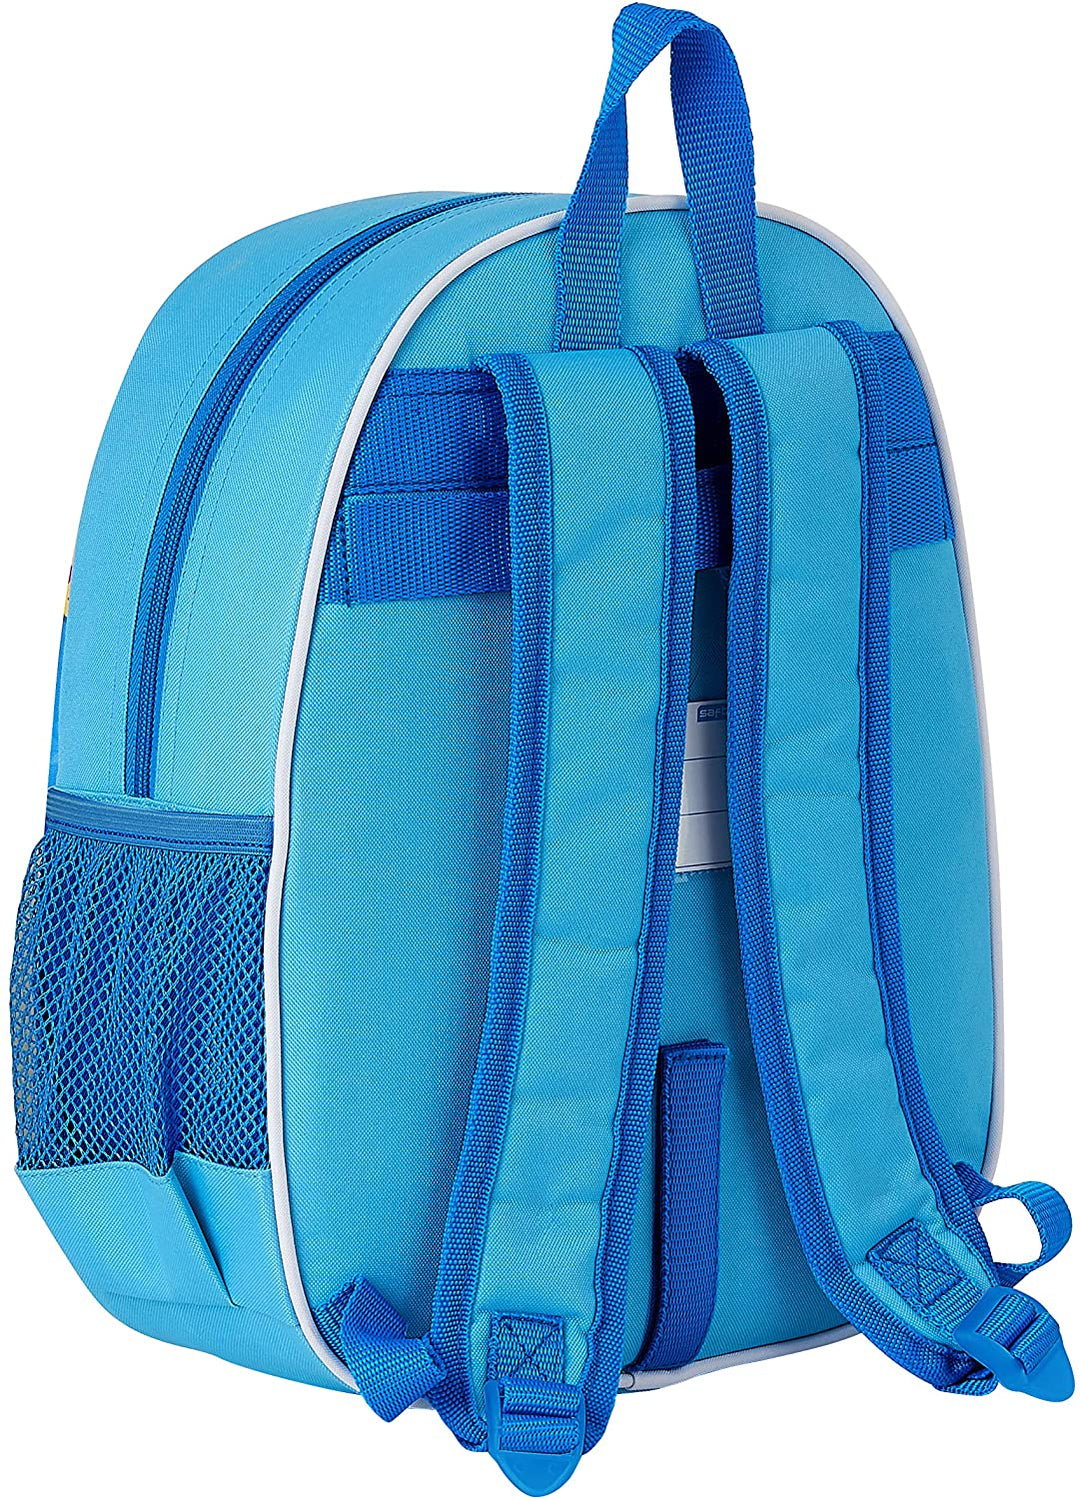 Safta Backpack with 3D Design Adaptable to Trolley by SuperZings, 270 x 100 x 32